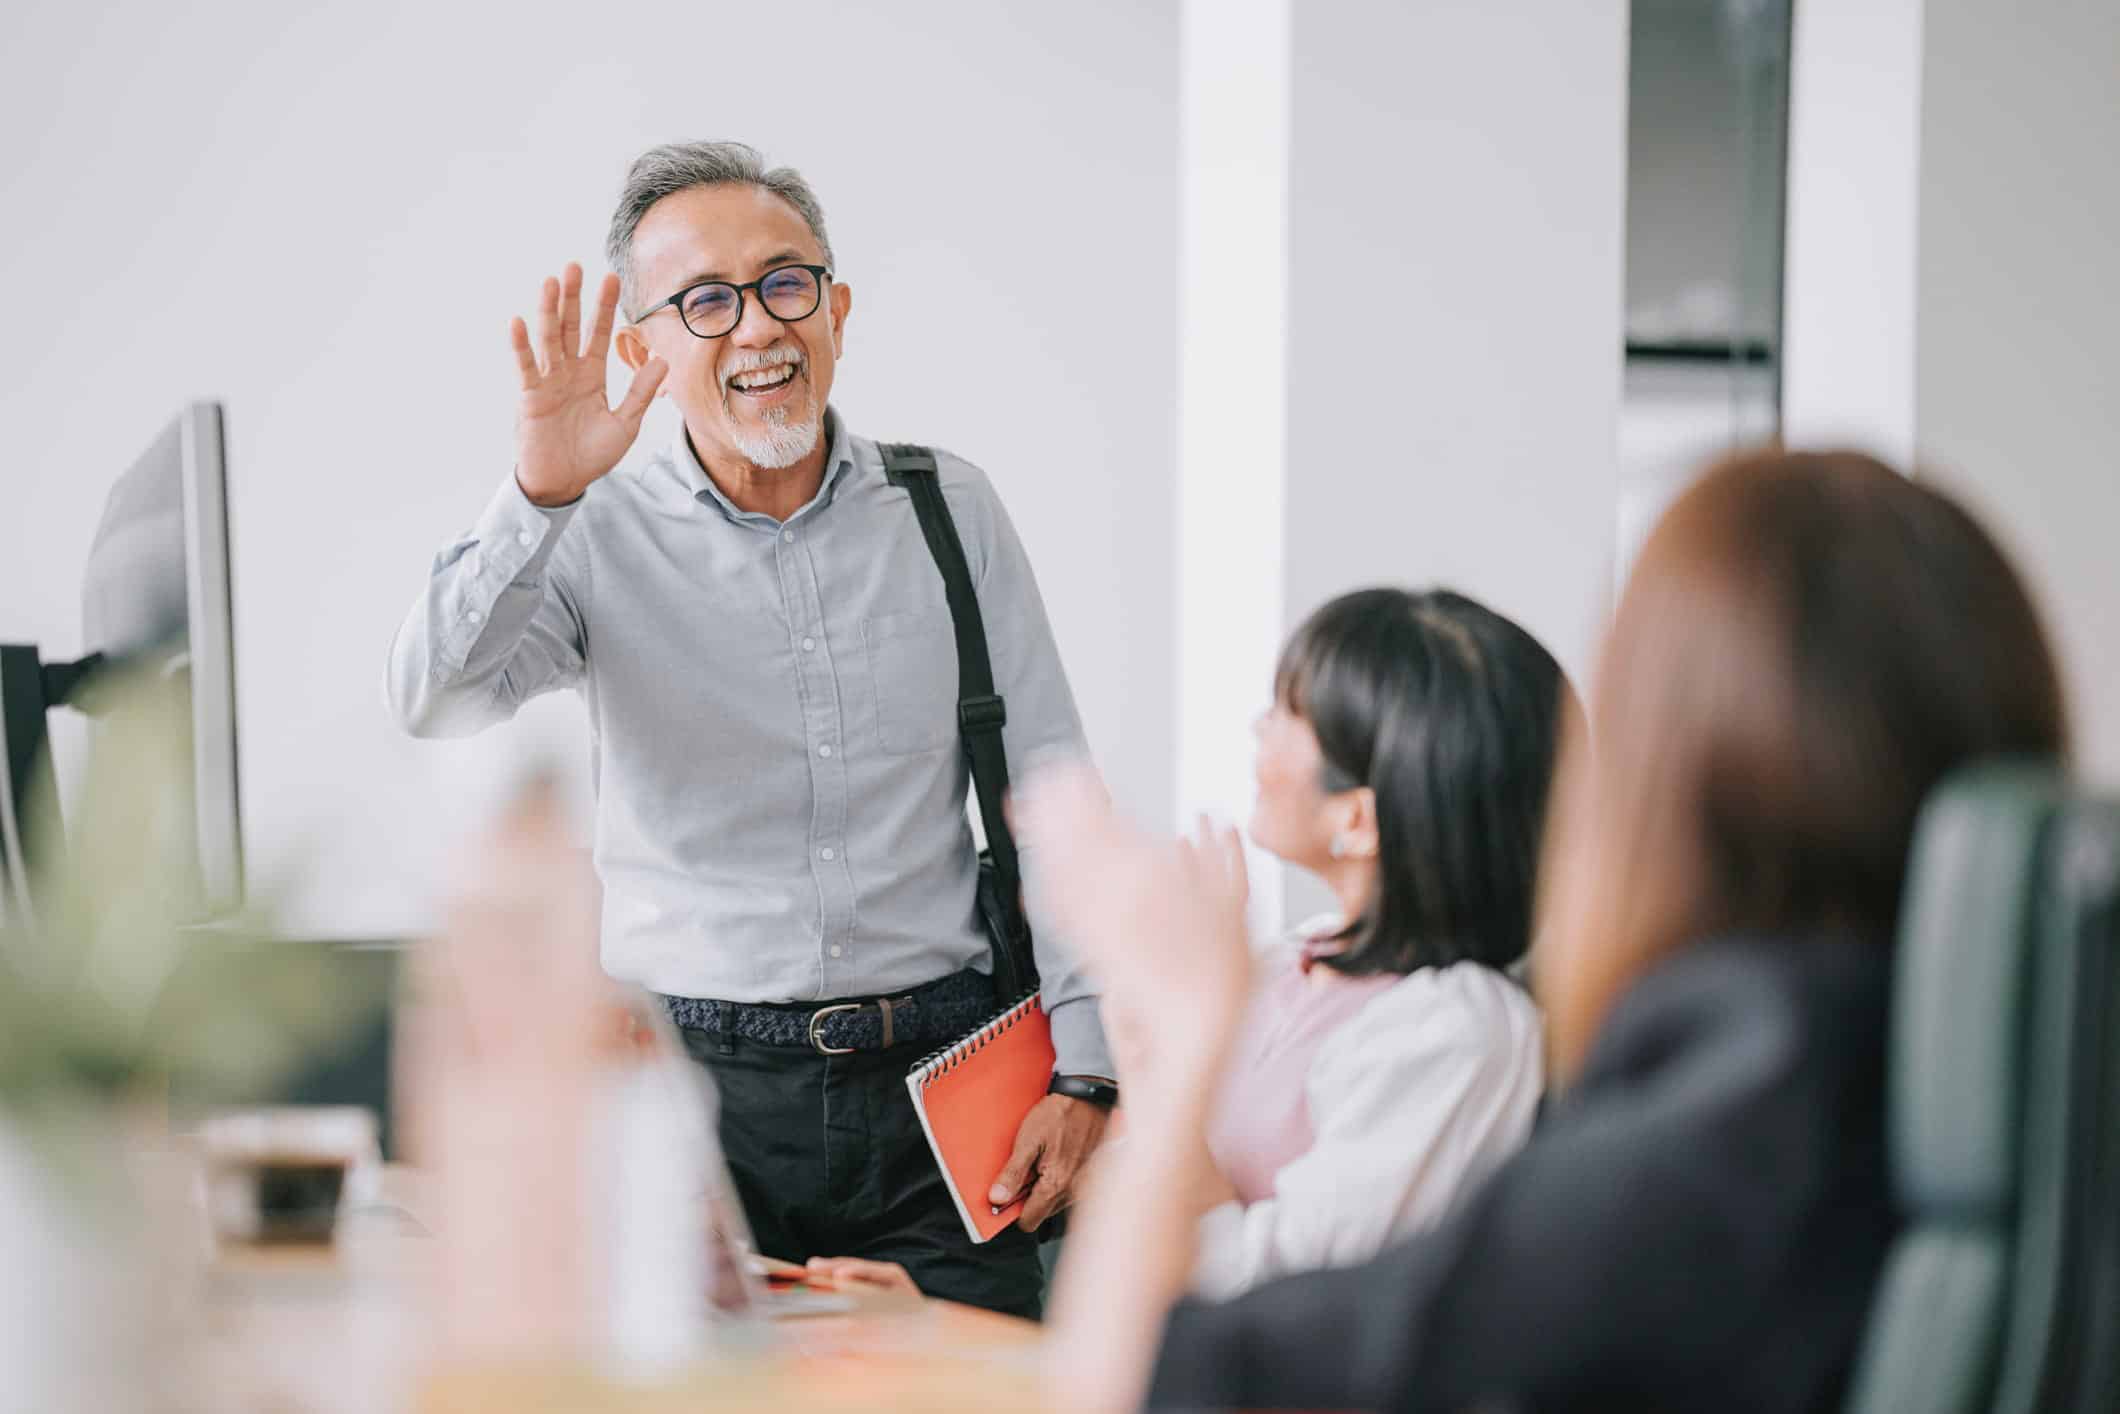 elderly part-time worker waving at his co-workers